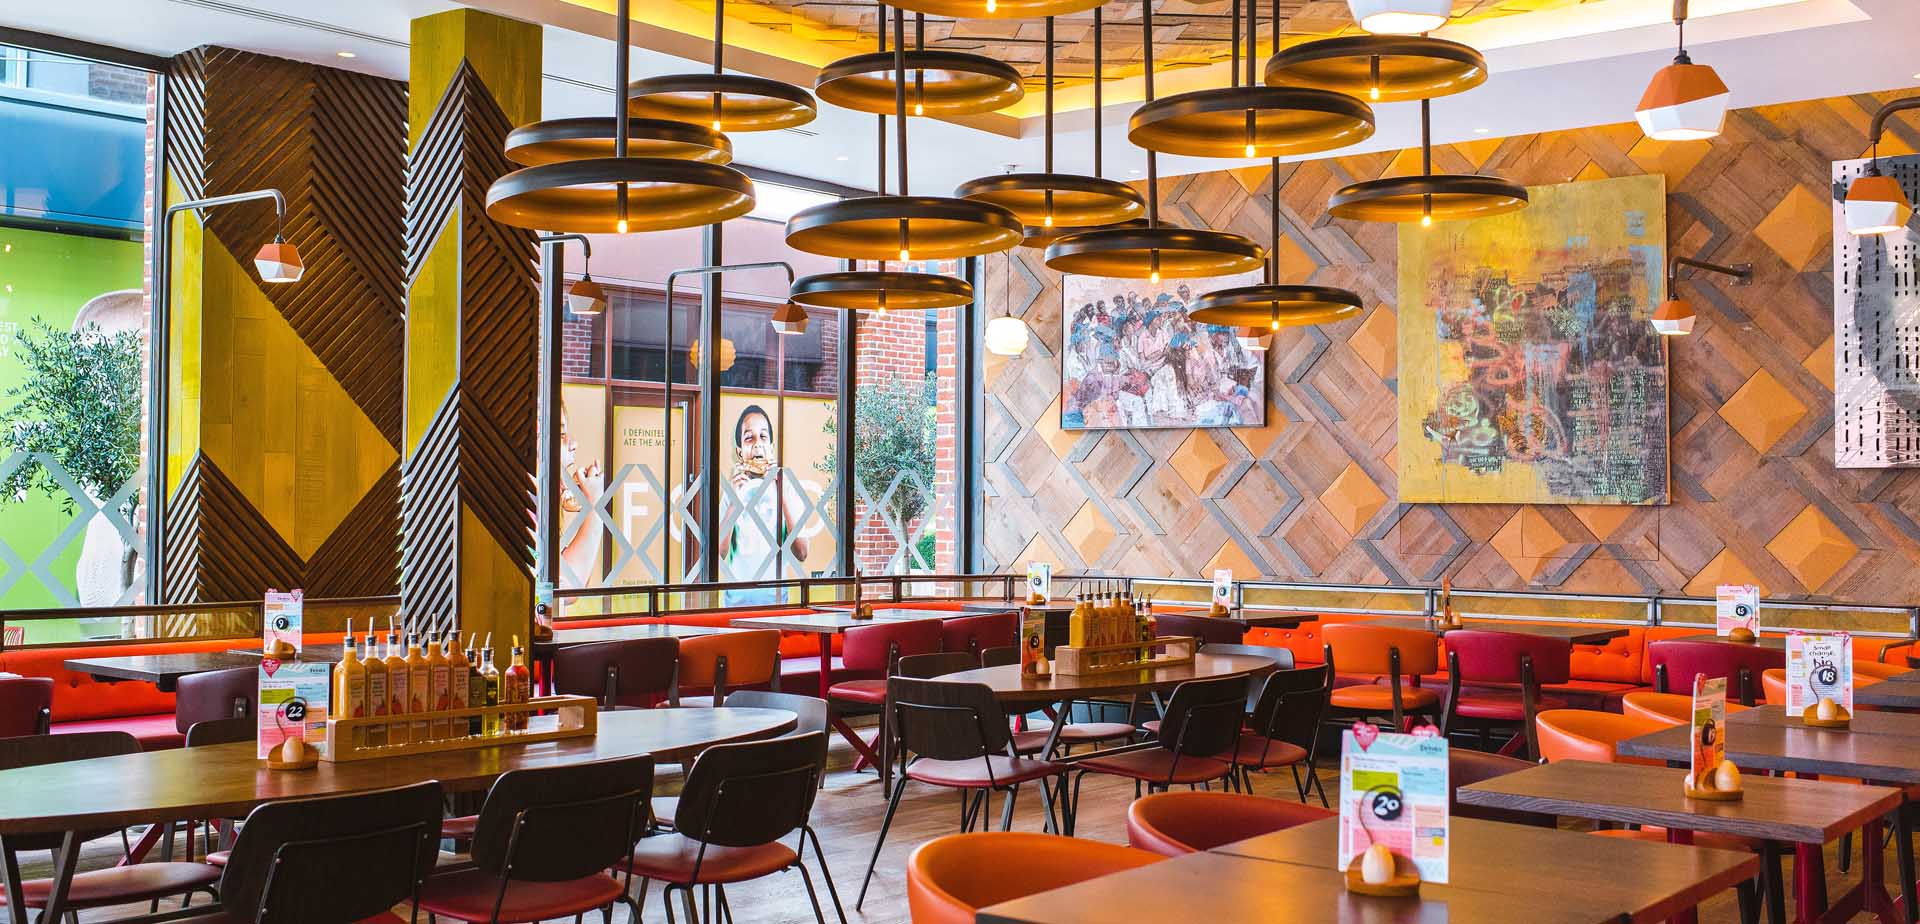 Atlas is a digital workplace that reflects Nando's culture and values.